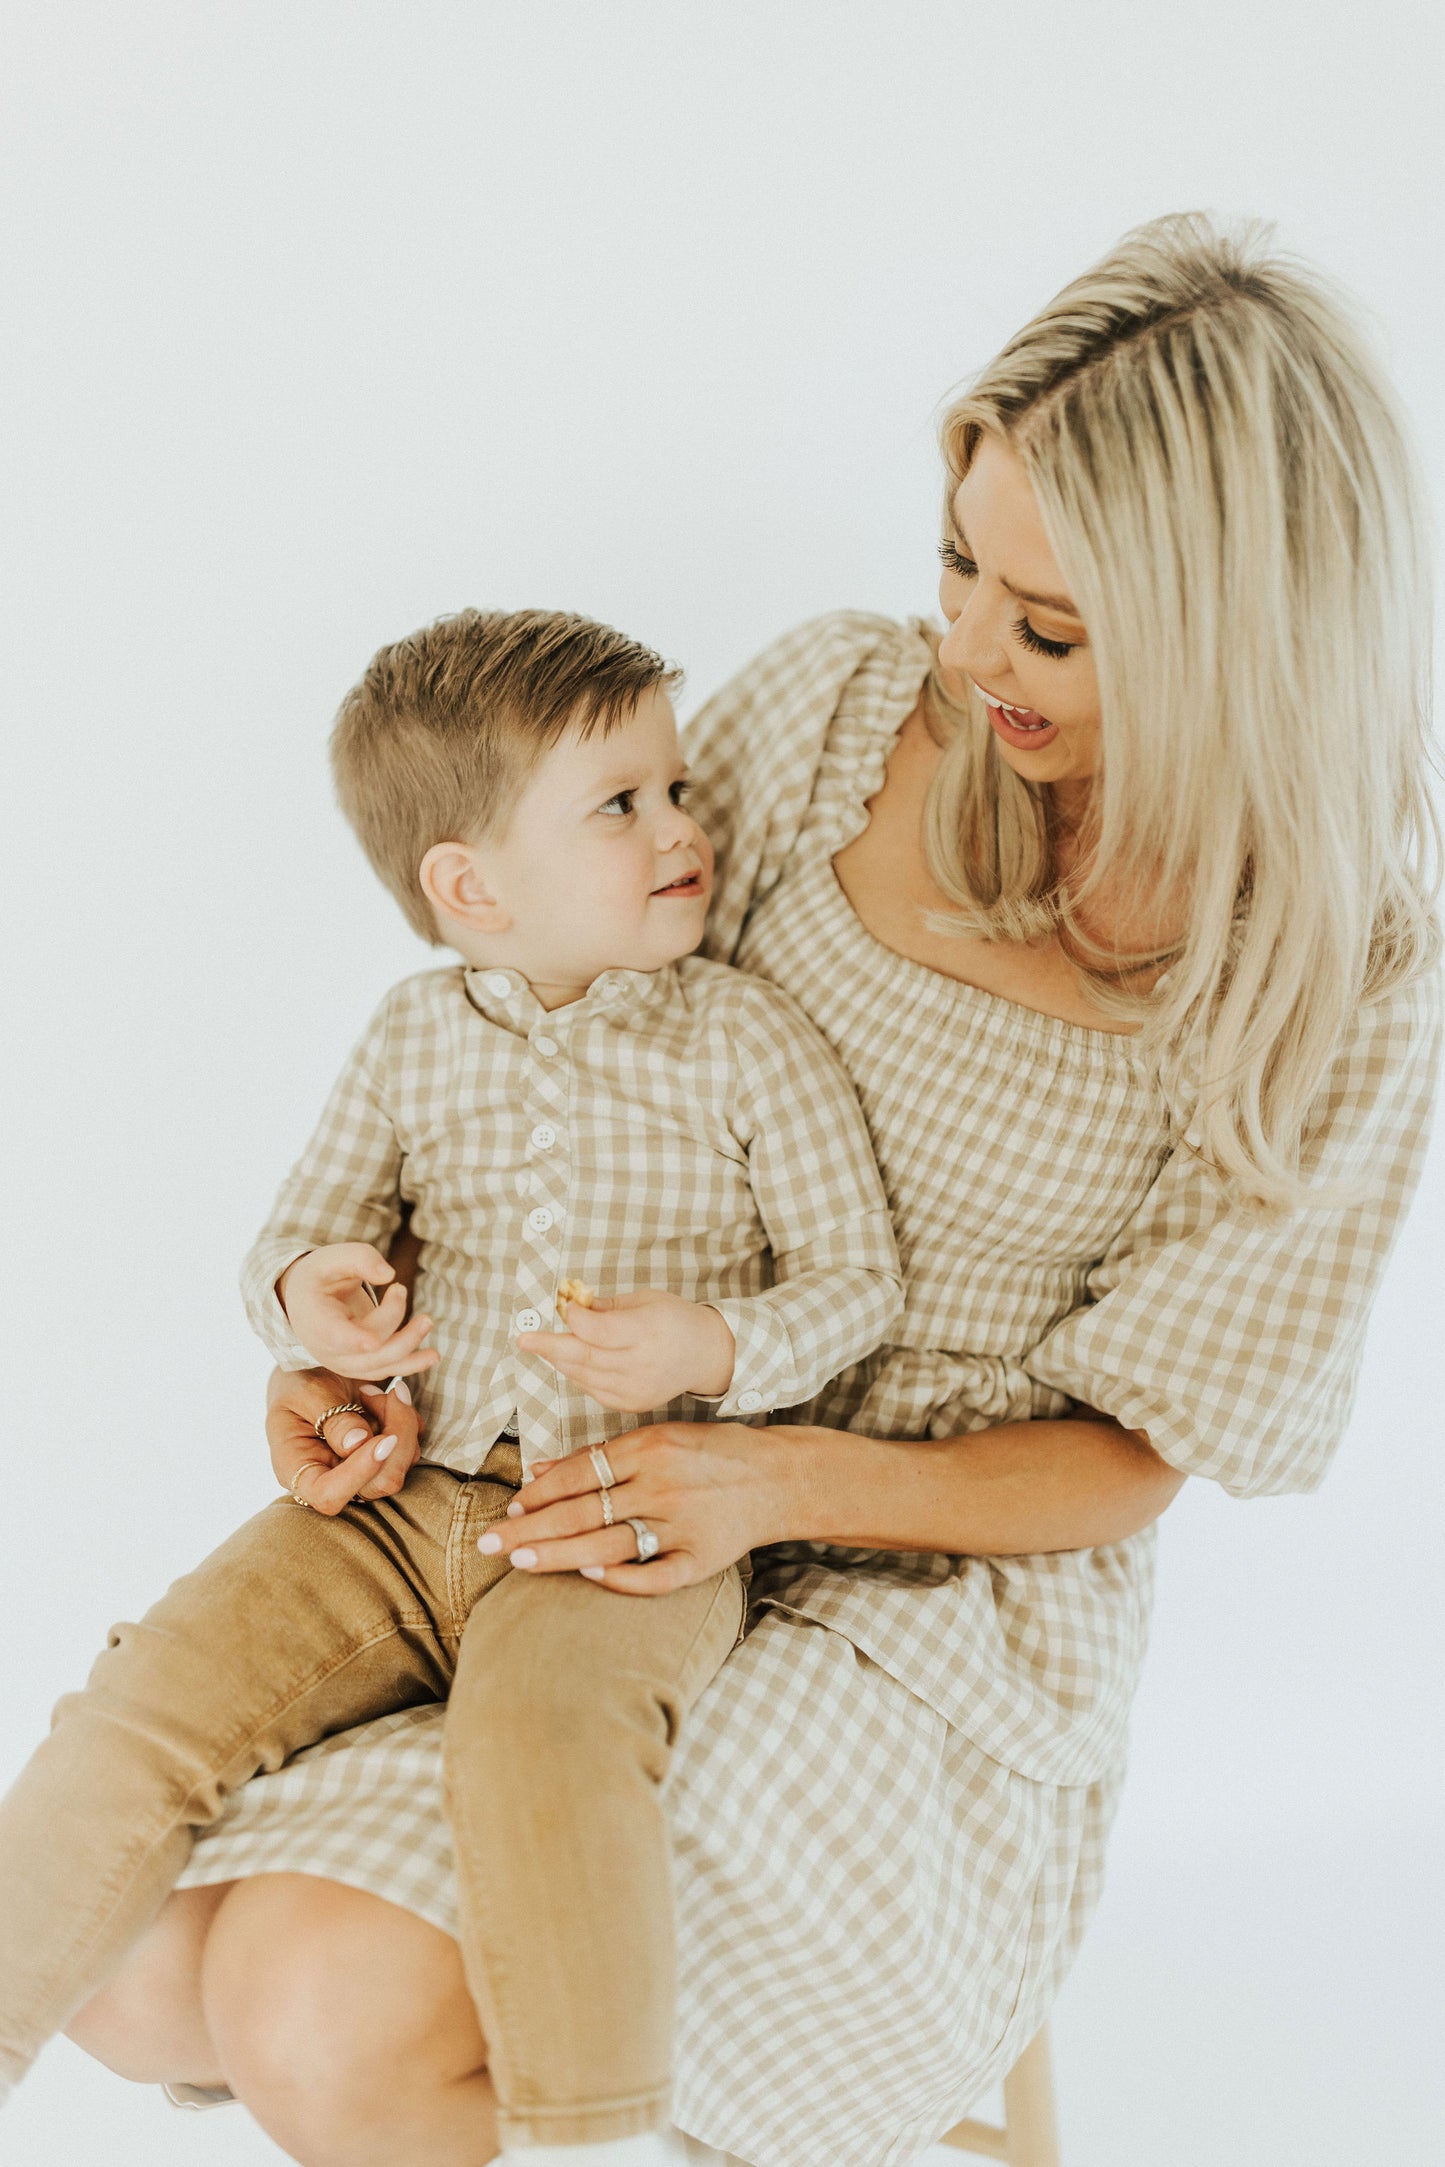 Mommy and me clothing, women’s fashion, children’s fashion, children’s clothing, matching outfits, matching dresses, mommy and me matching outfits, girl mom, boy mom, family outfits, matching family clothing, woman owned business, Mommy&Me matching styles 